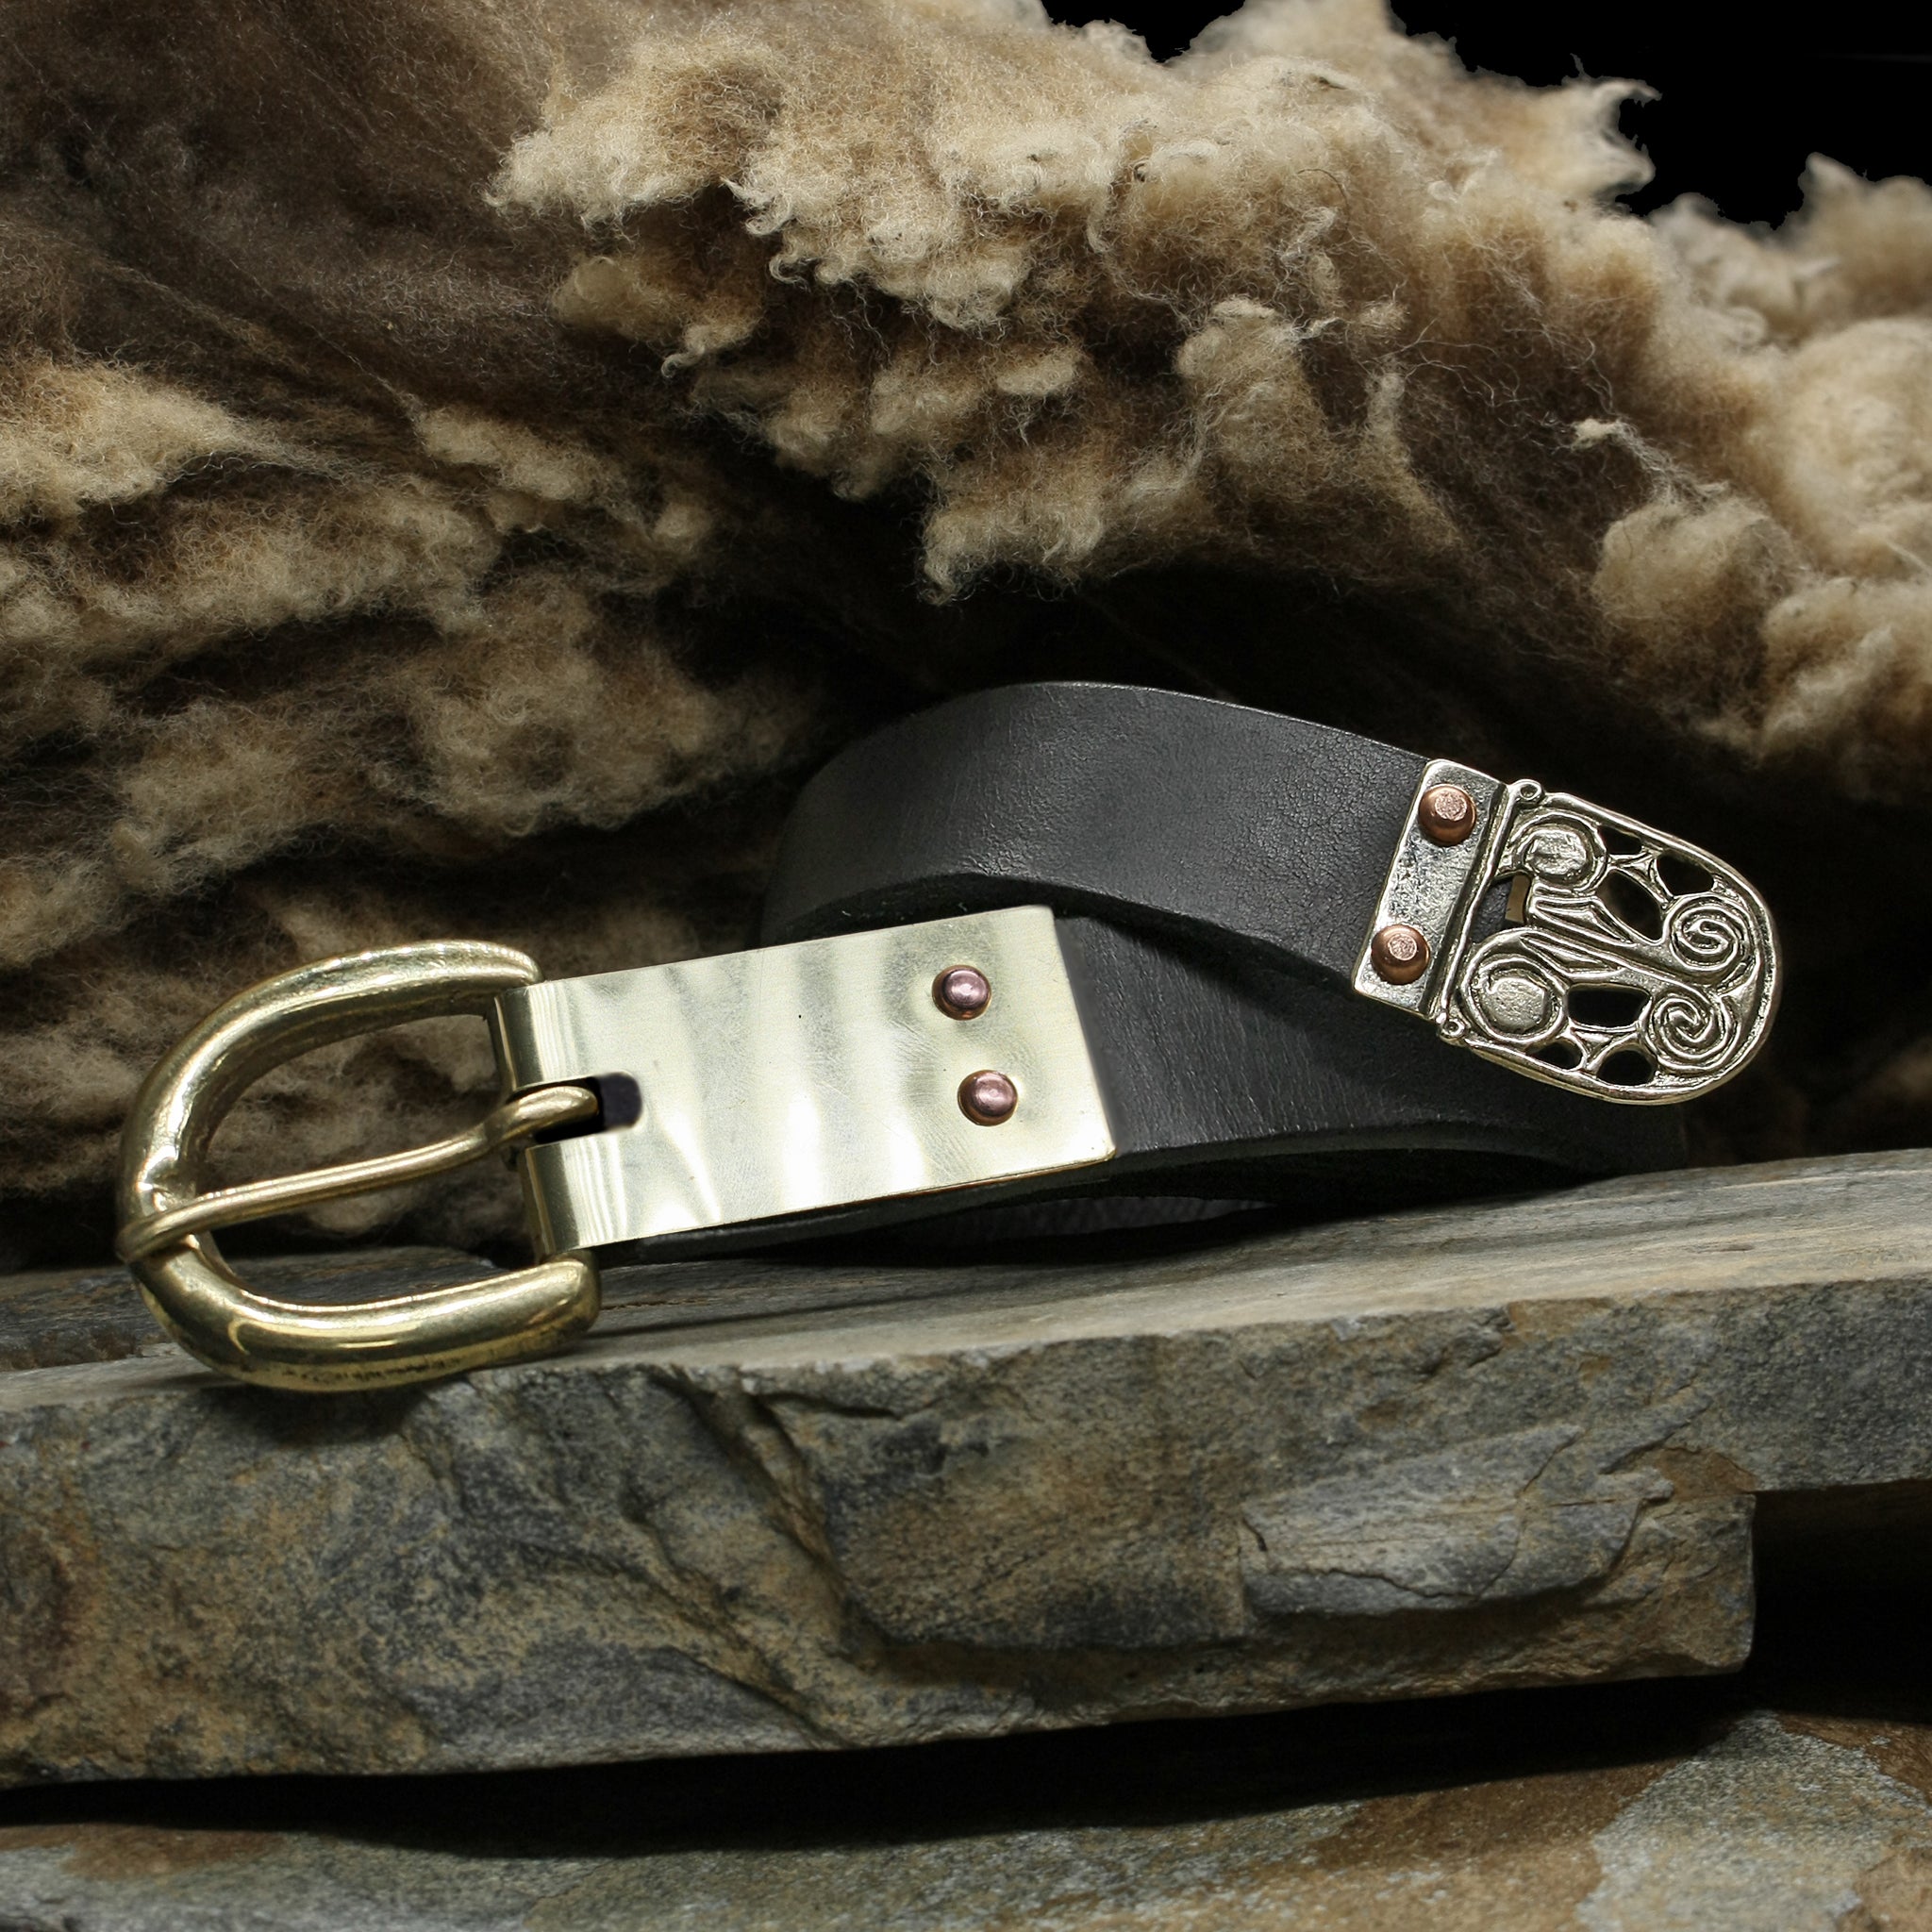 Custom Made 25mm (1 inch) Wide Leather Viking Belt with Brass Buckle